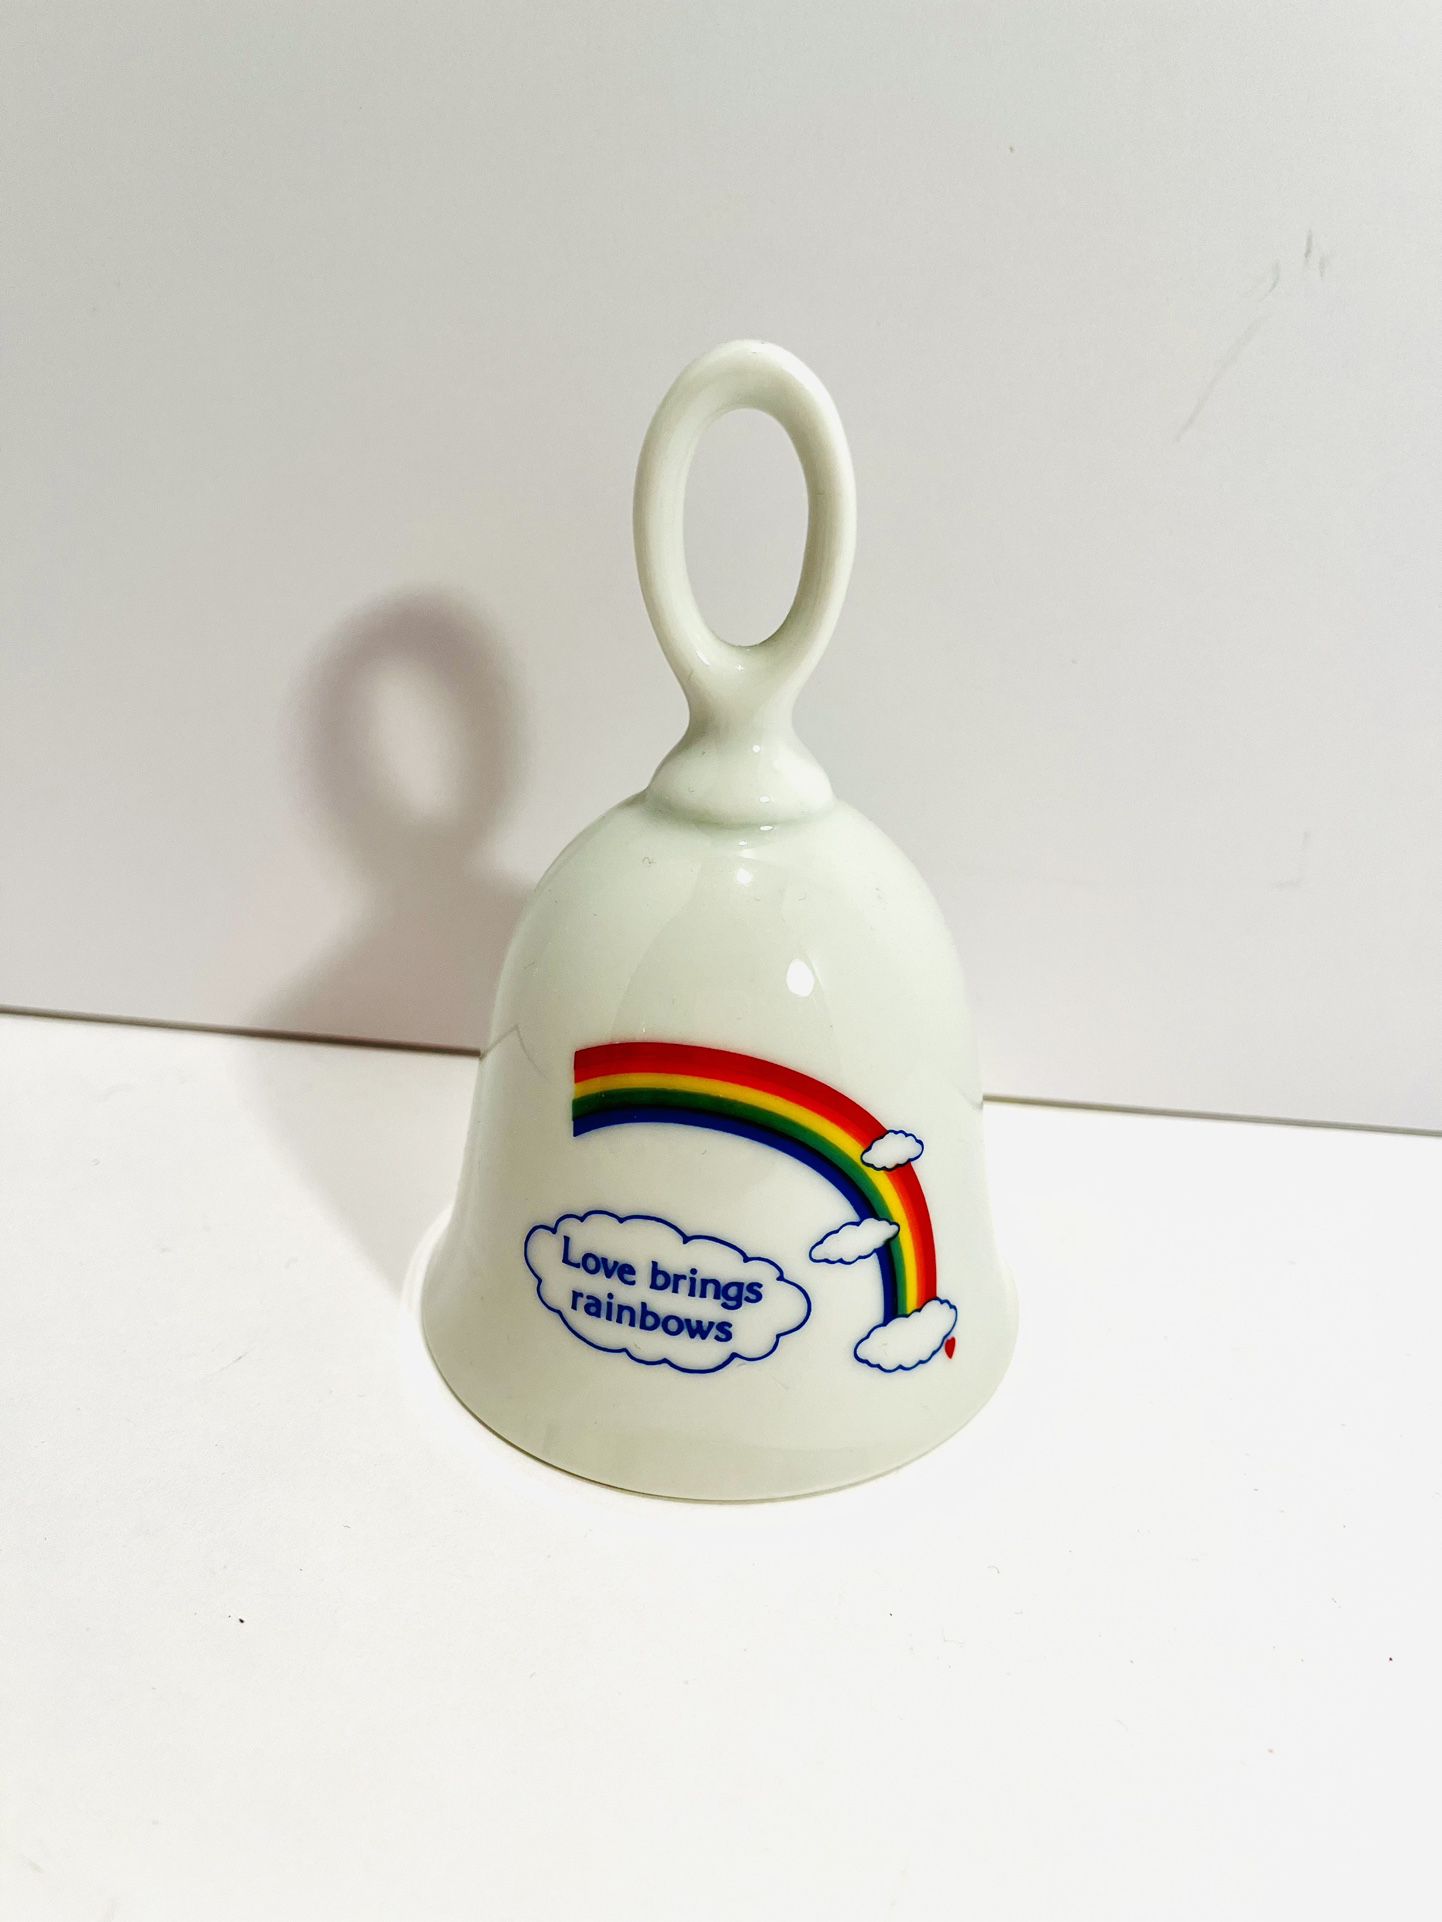 1980s Style Papel California Porcelain Bell Love Brings Rainbows - 4.5” Tall